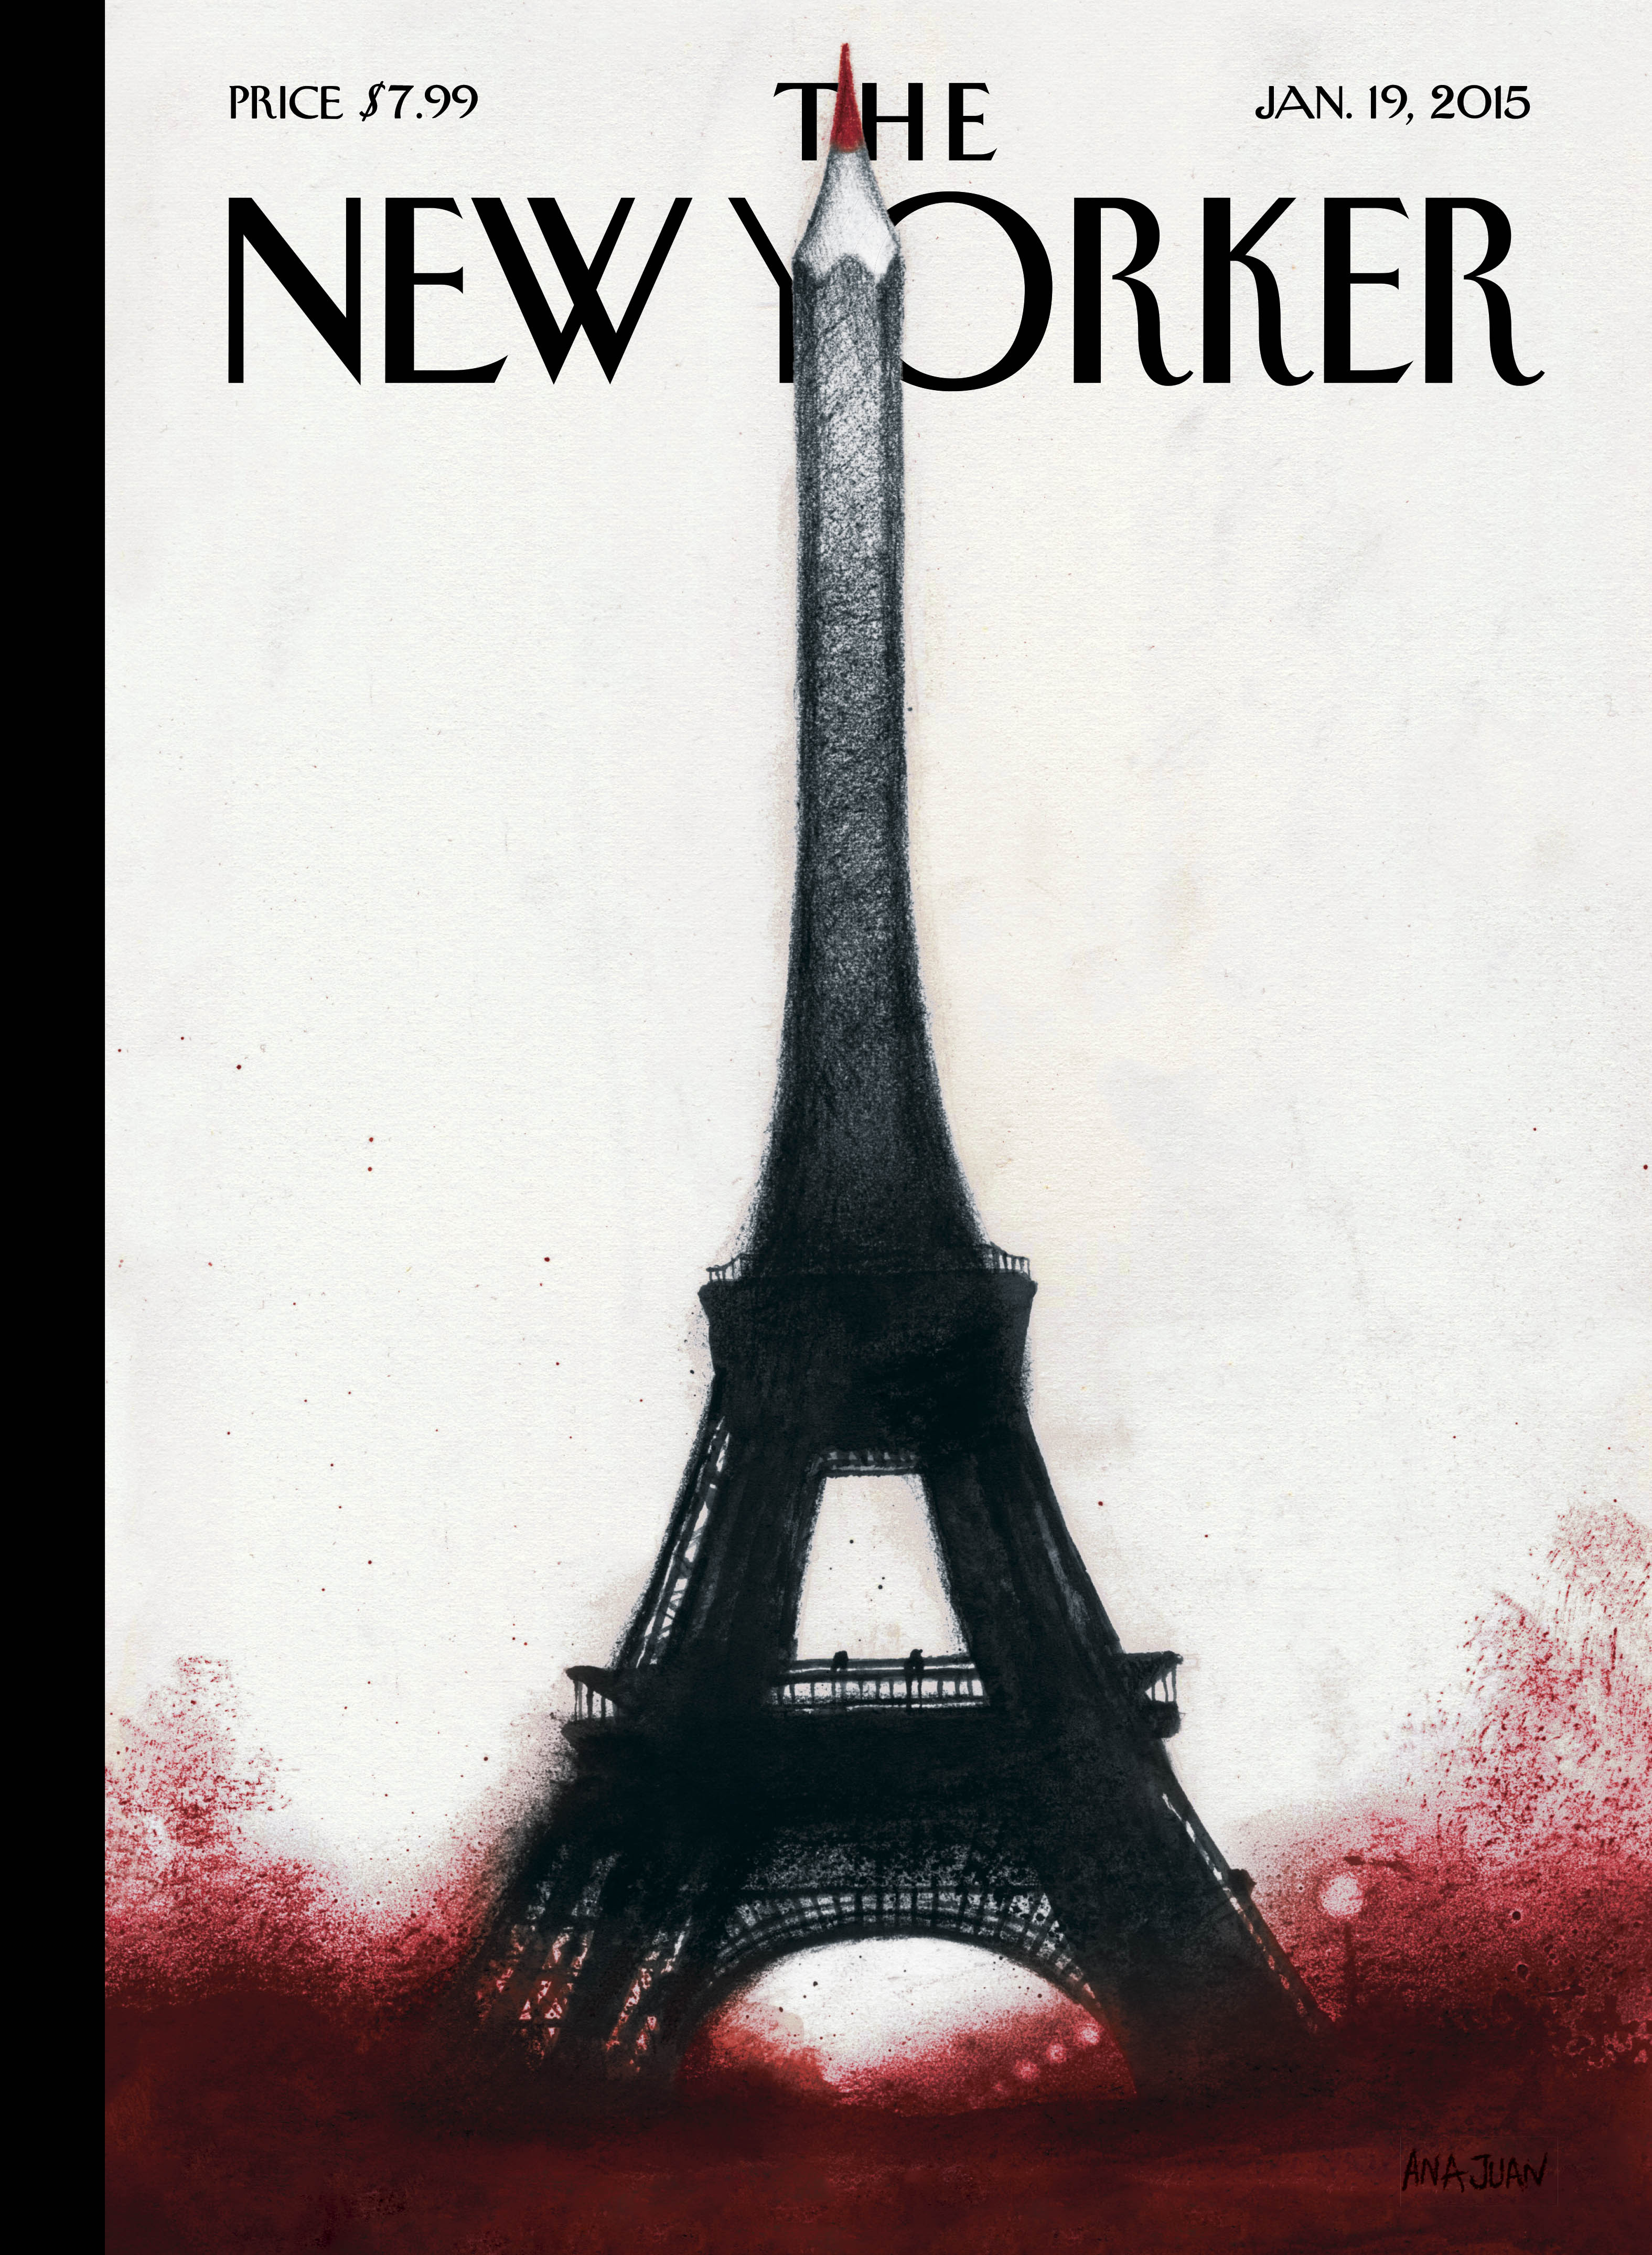 The New Yorker-"Solidarité," January 19